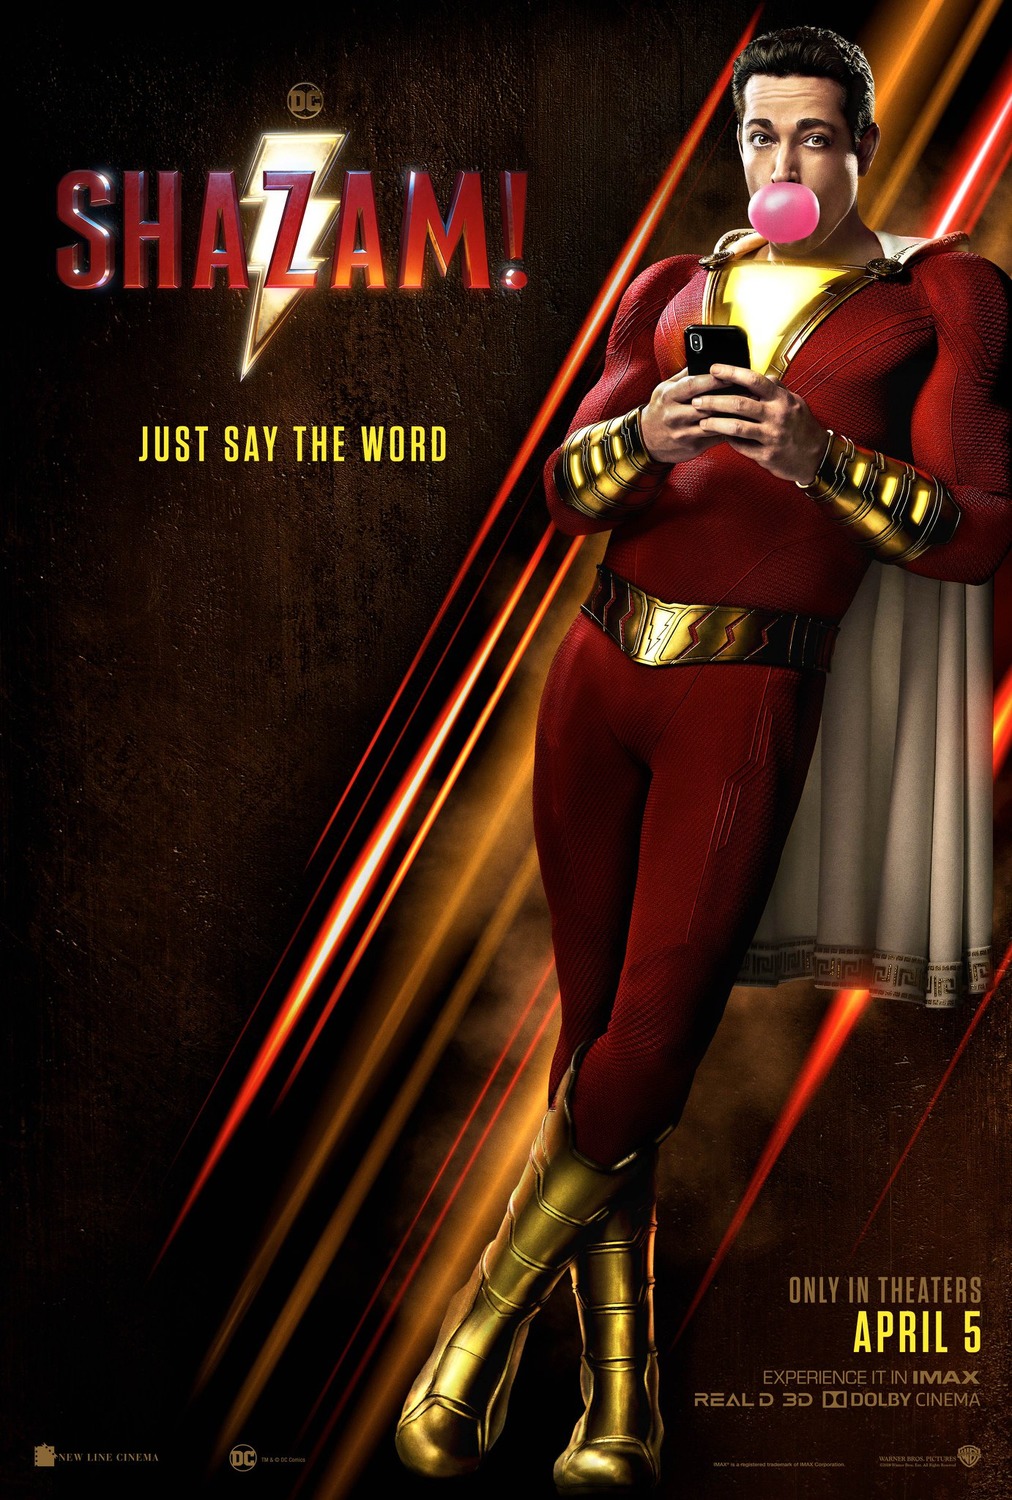 Stand the chance to win 2 tickets to see Shazam!